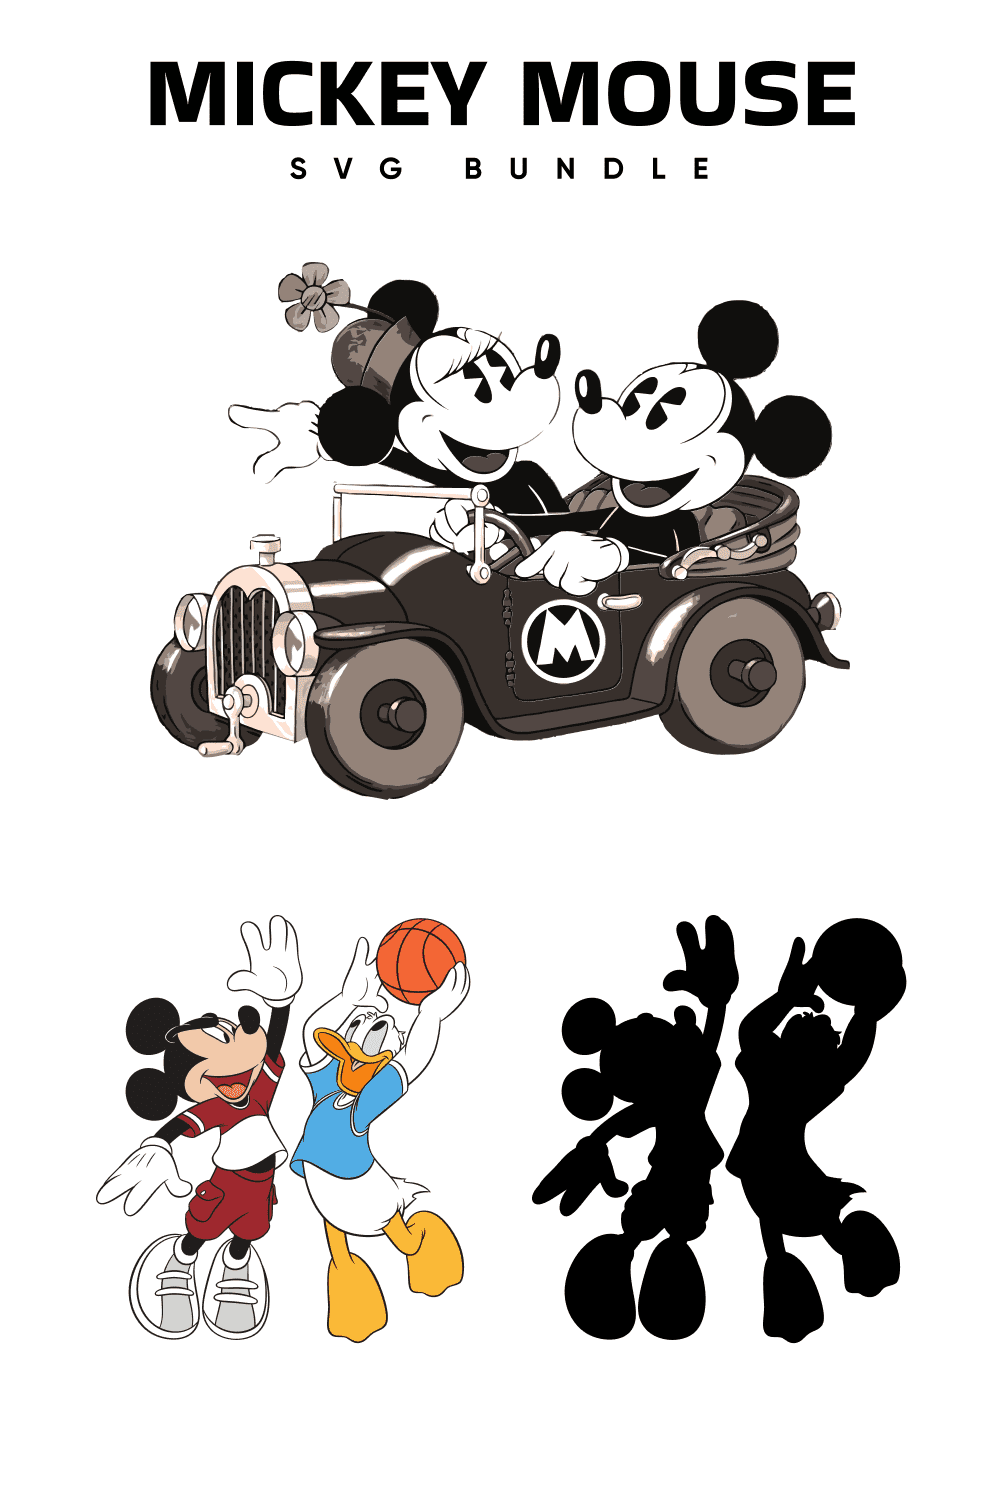 A set of gorgeous Mickey Mouse images.